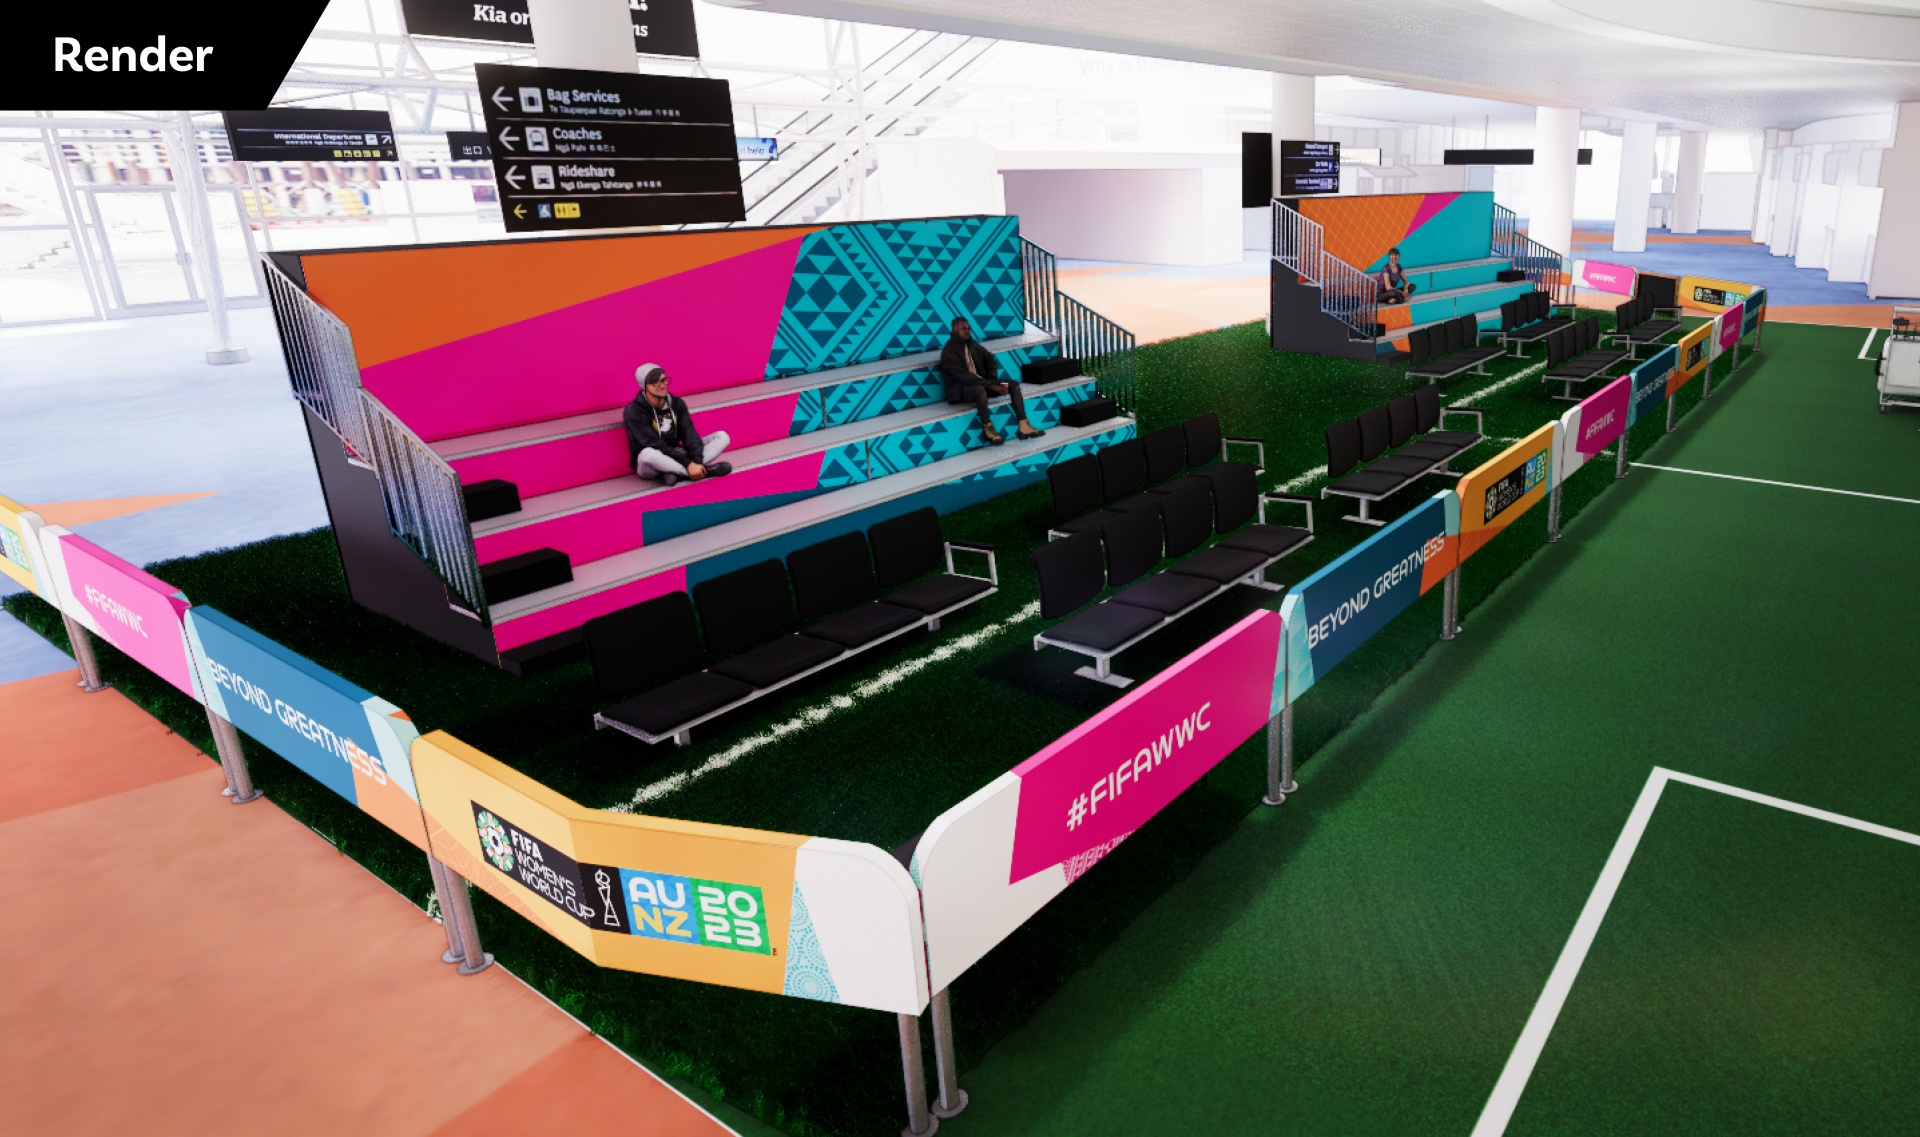 AIA FiFA Grand stand Render